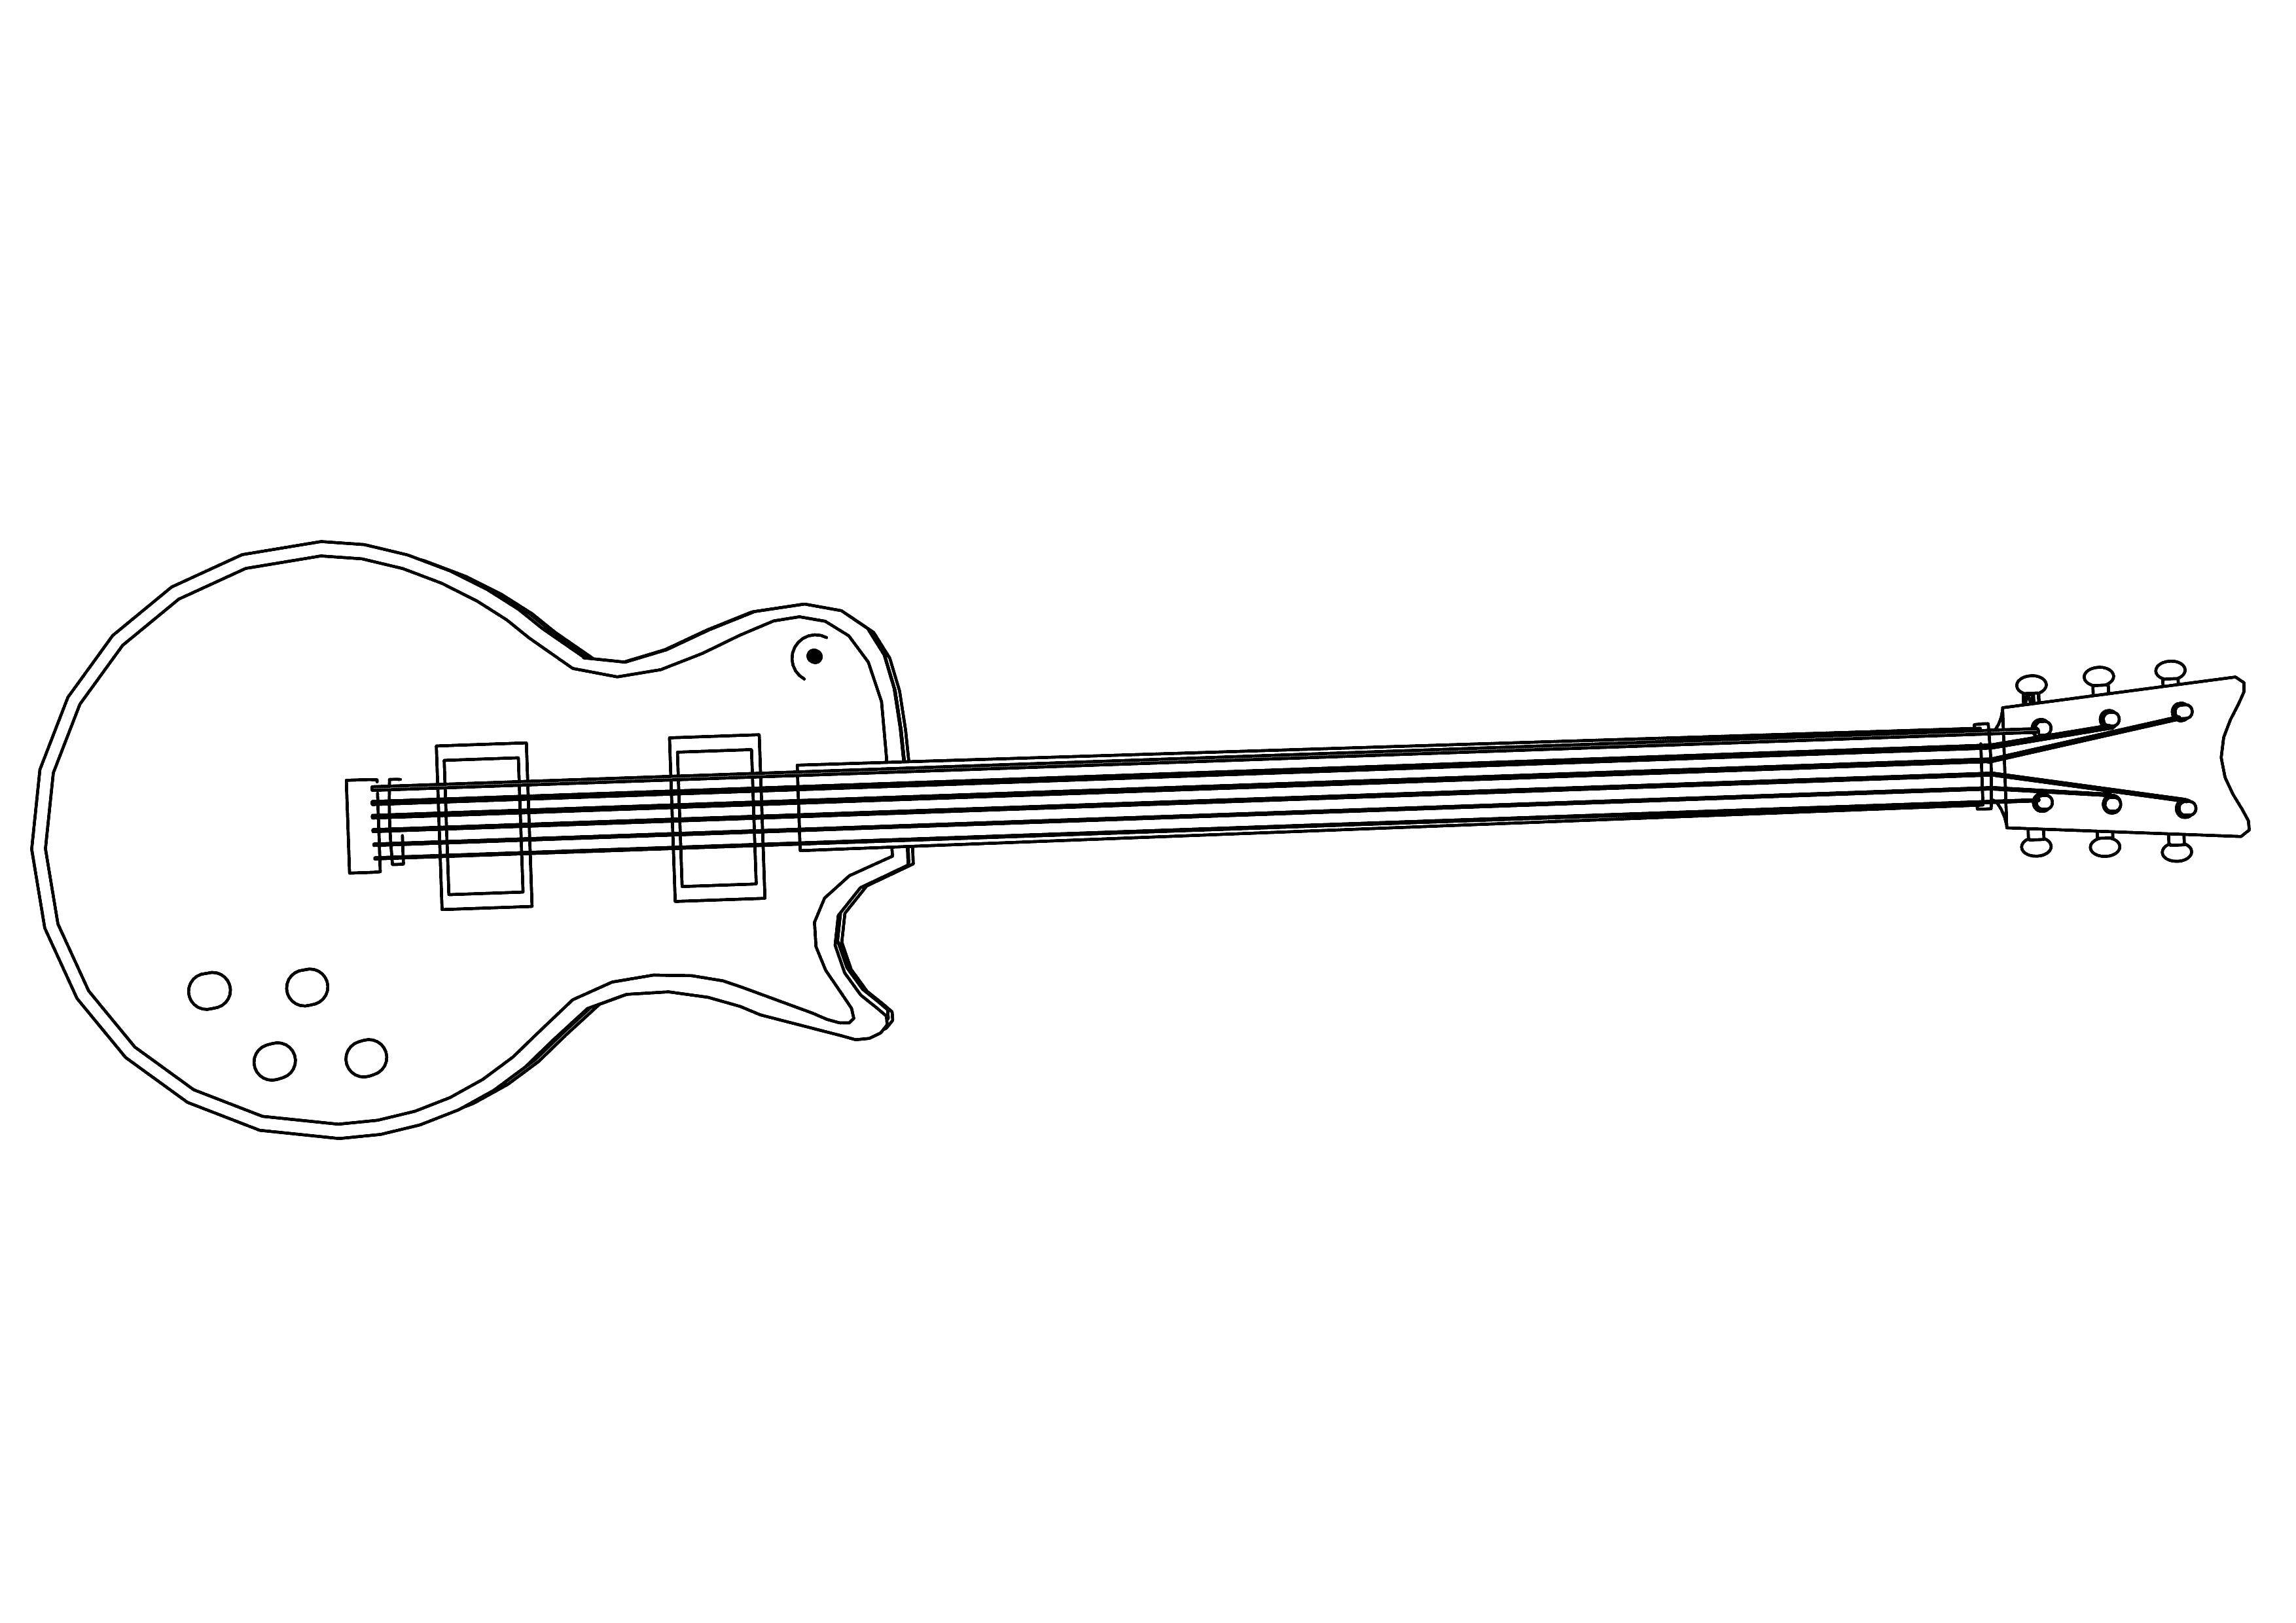 Coloring Electric guitar. Category Electric guitar. Tags:  Electric guitar, guitar.